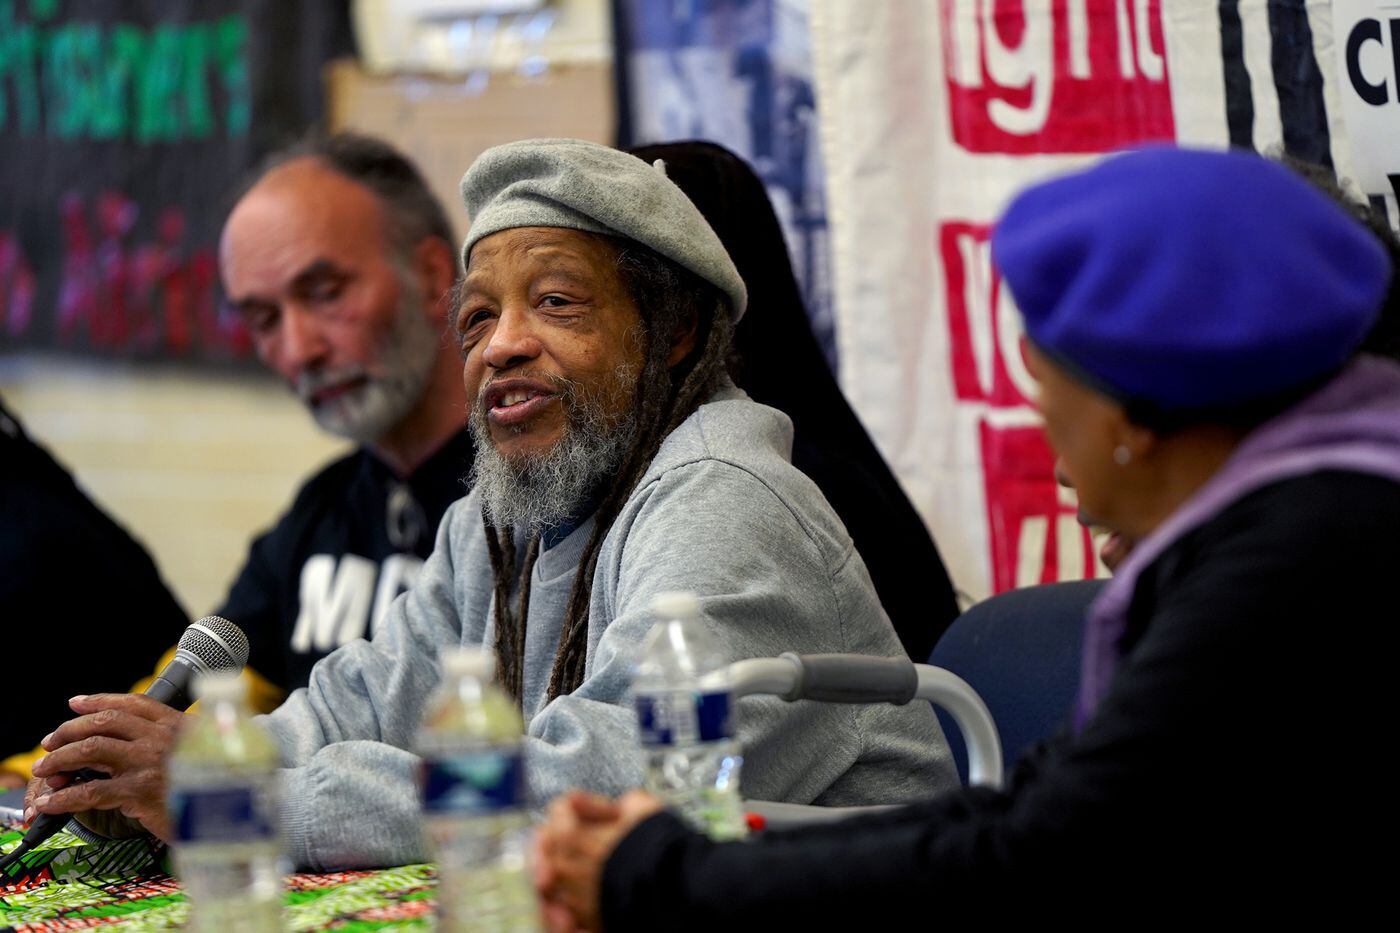 Move                         member Delbert Africa, who was paroled from                         state prison after nearly 42 years, held a news                         conference with other members of the MOVE family                         at the Kingsessing Library in West                         Philadelphia.